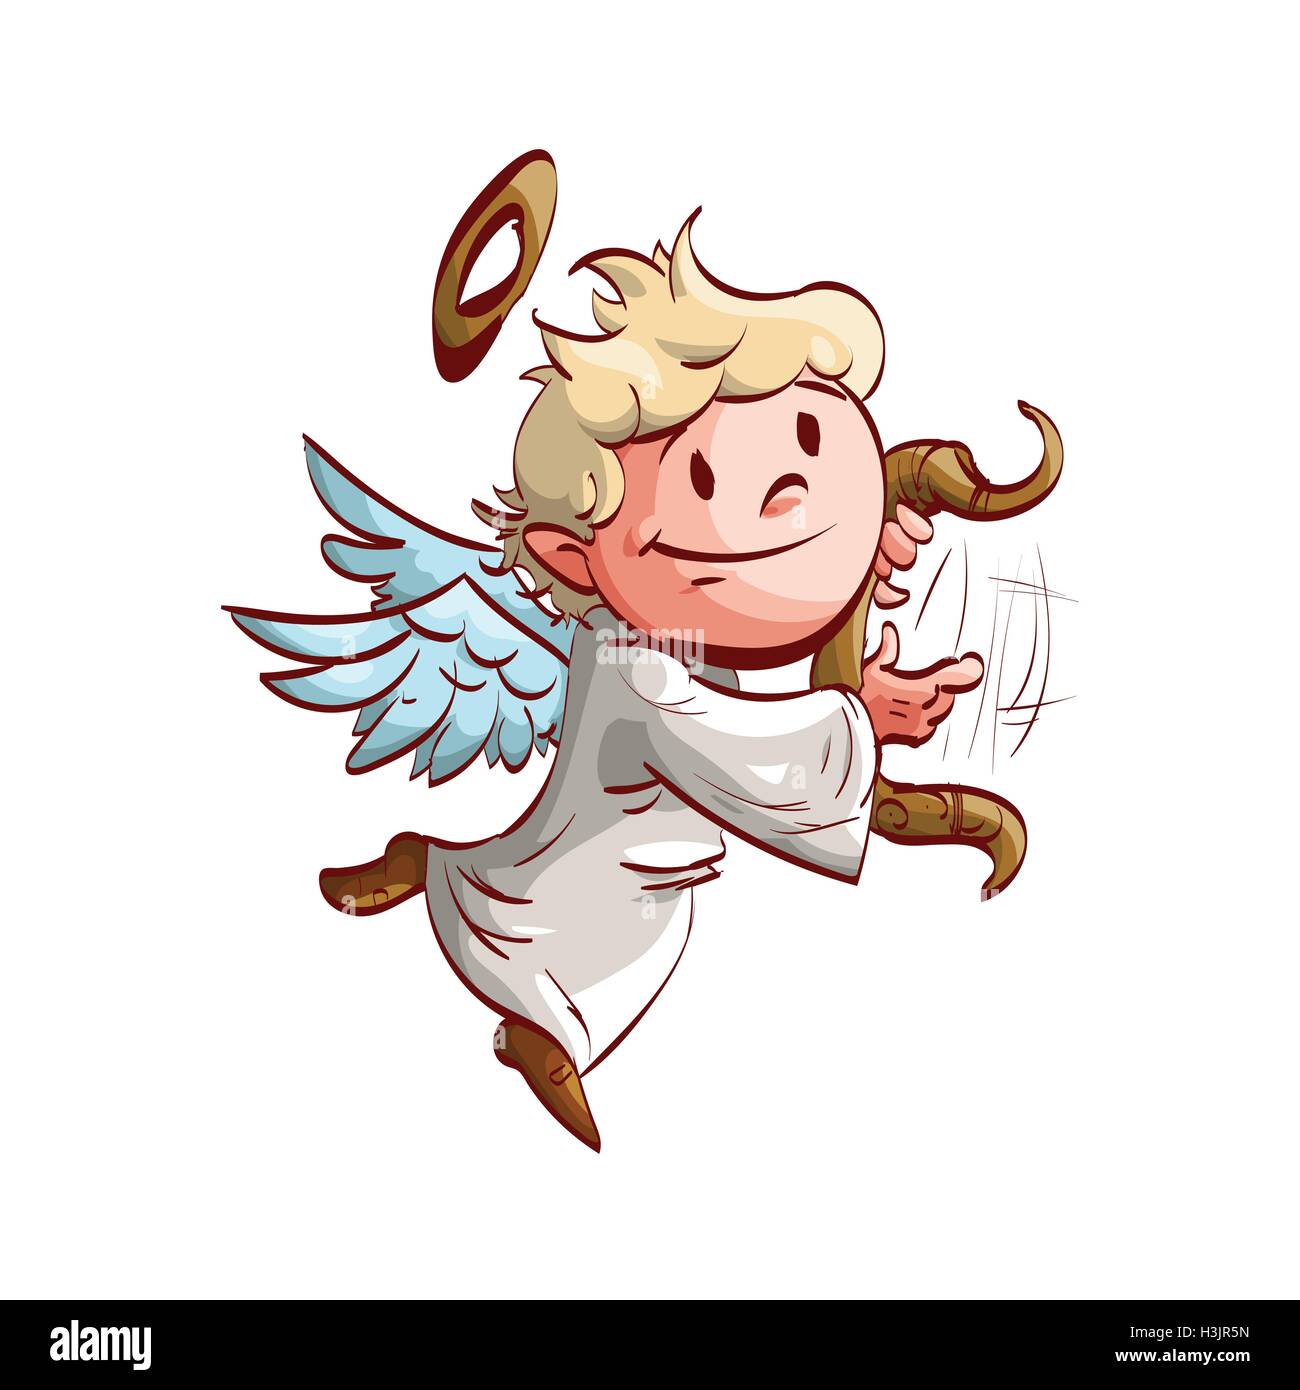 Colorful vector illustration of a cartoon cute angel, playing a lyre and flying. Stock Vector